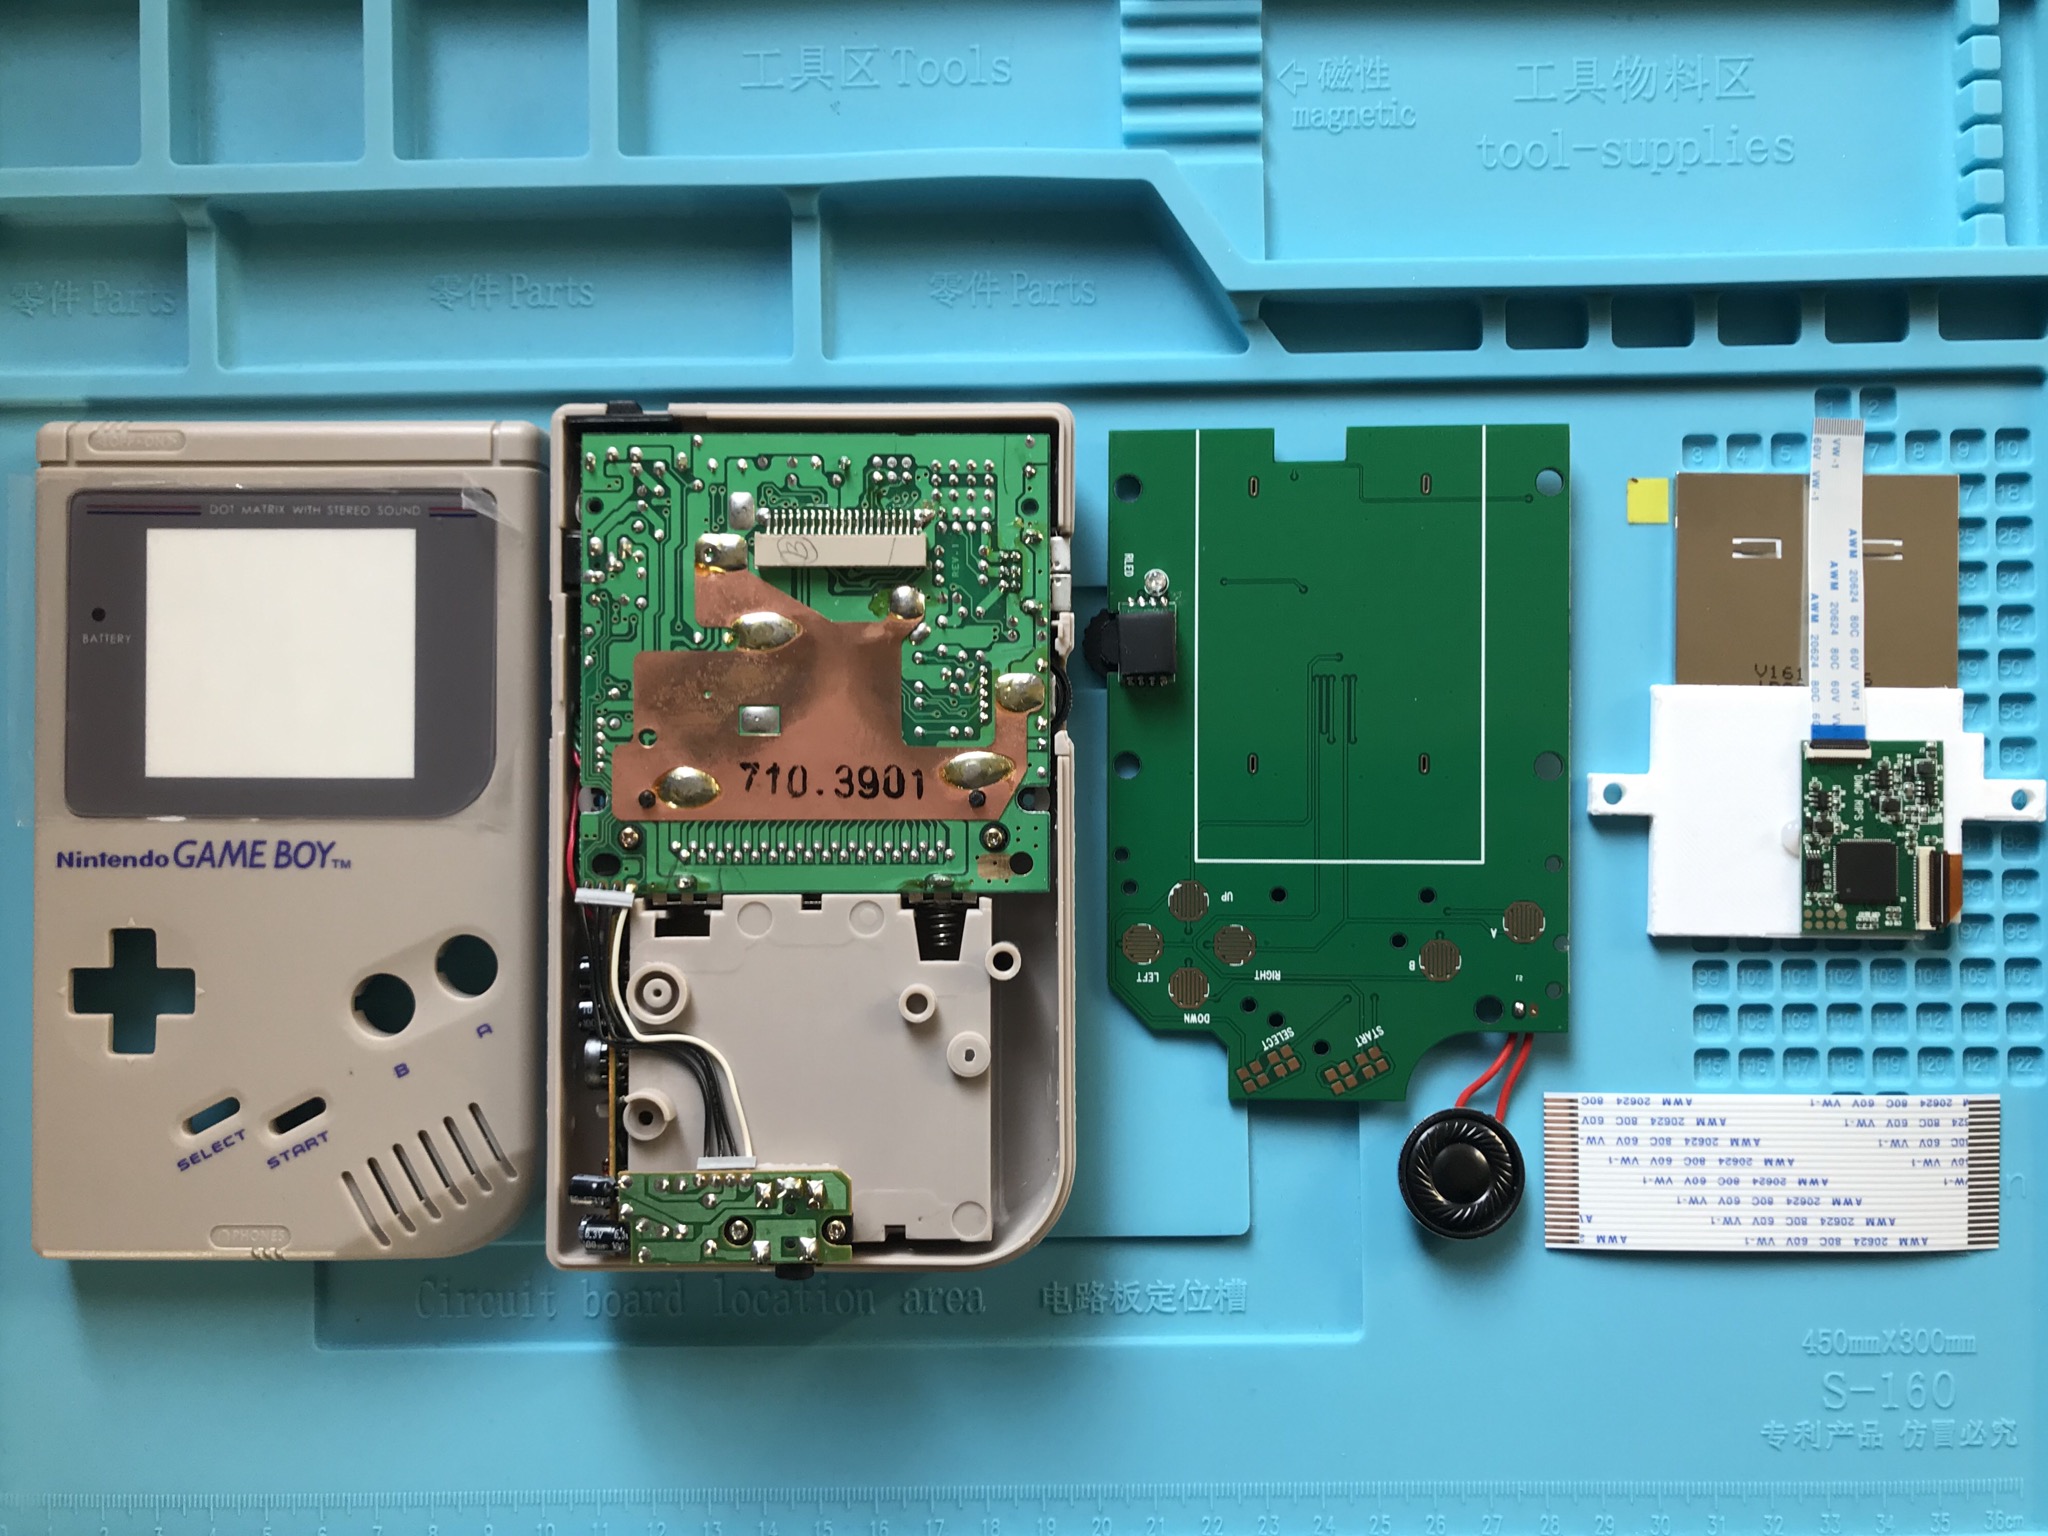 IPS screen kit and aftermarket DMG Gameboy shell